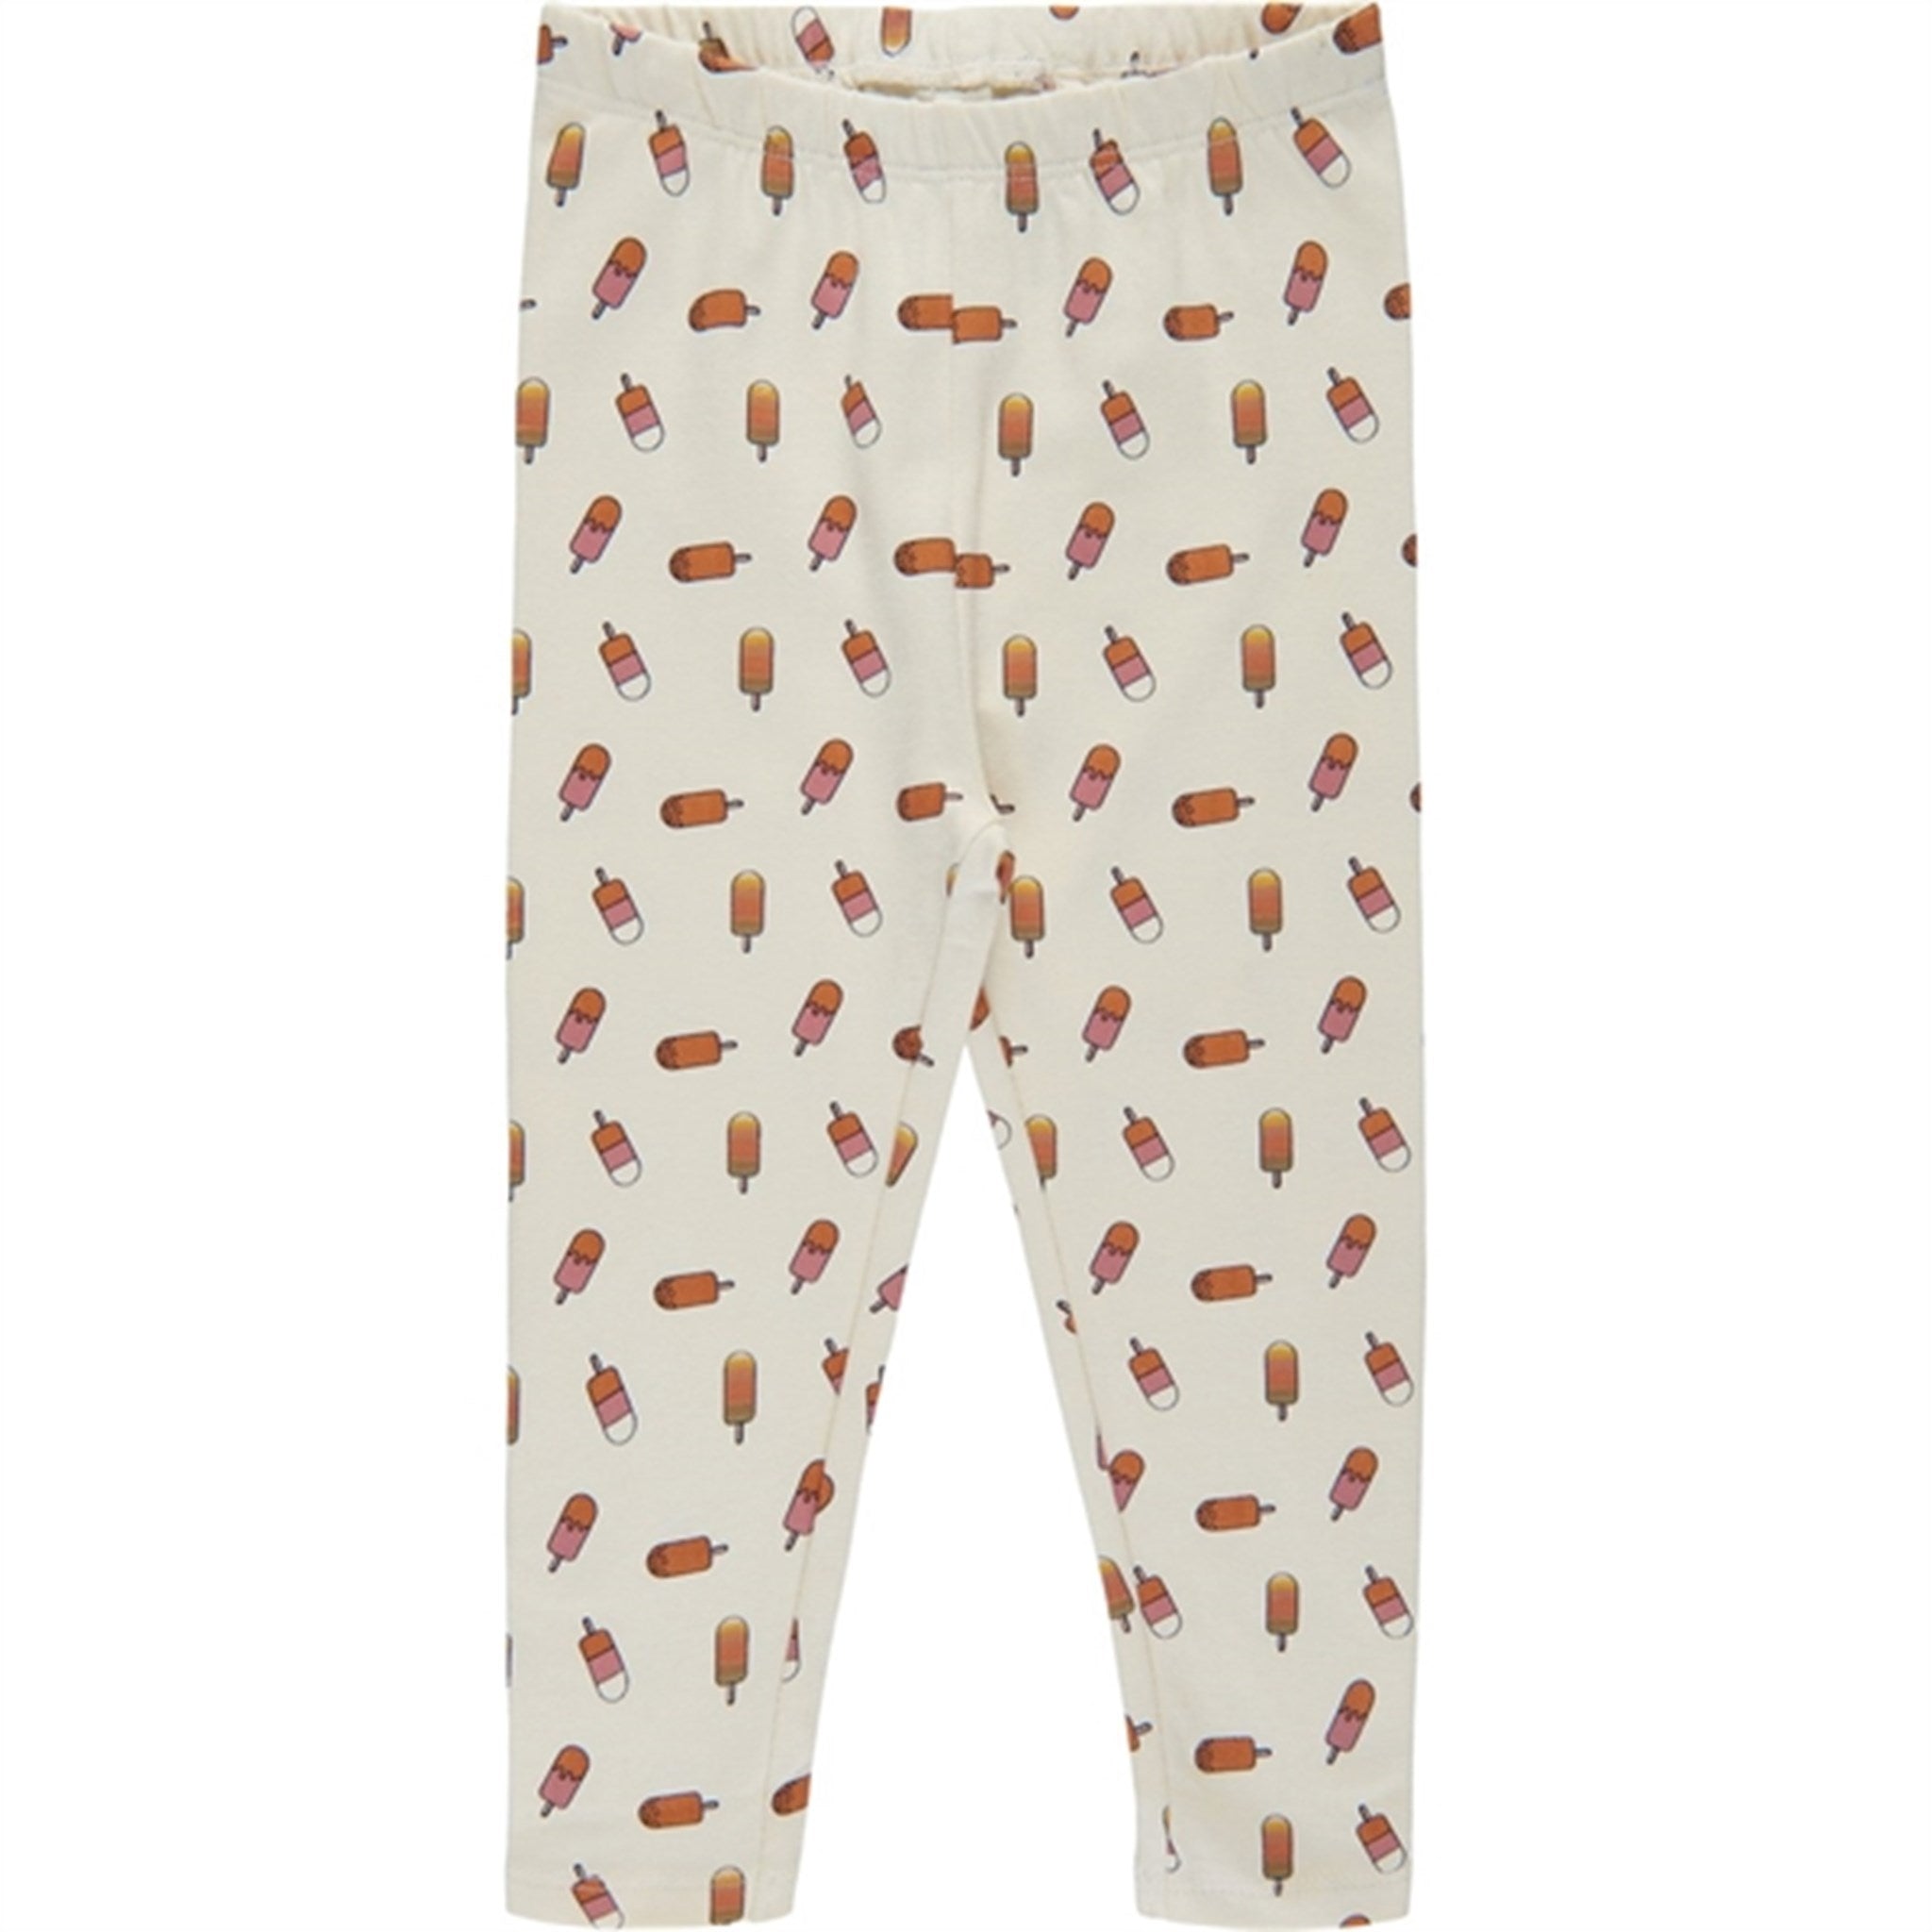 THE NEW Siblings Tiny Ice AOP Glace Leggings 3